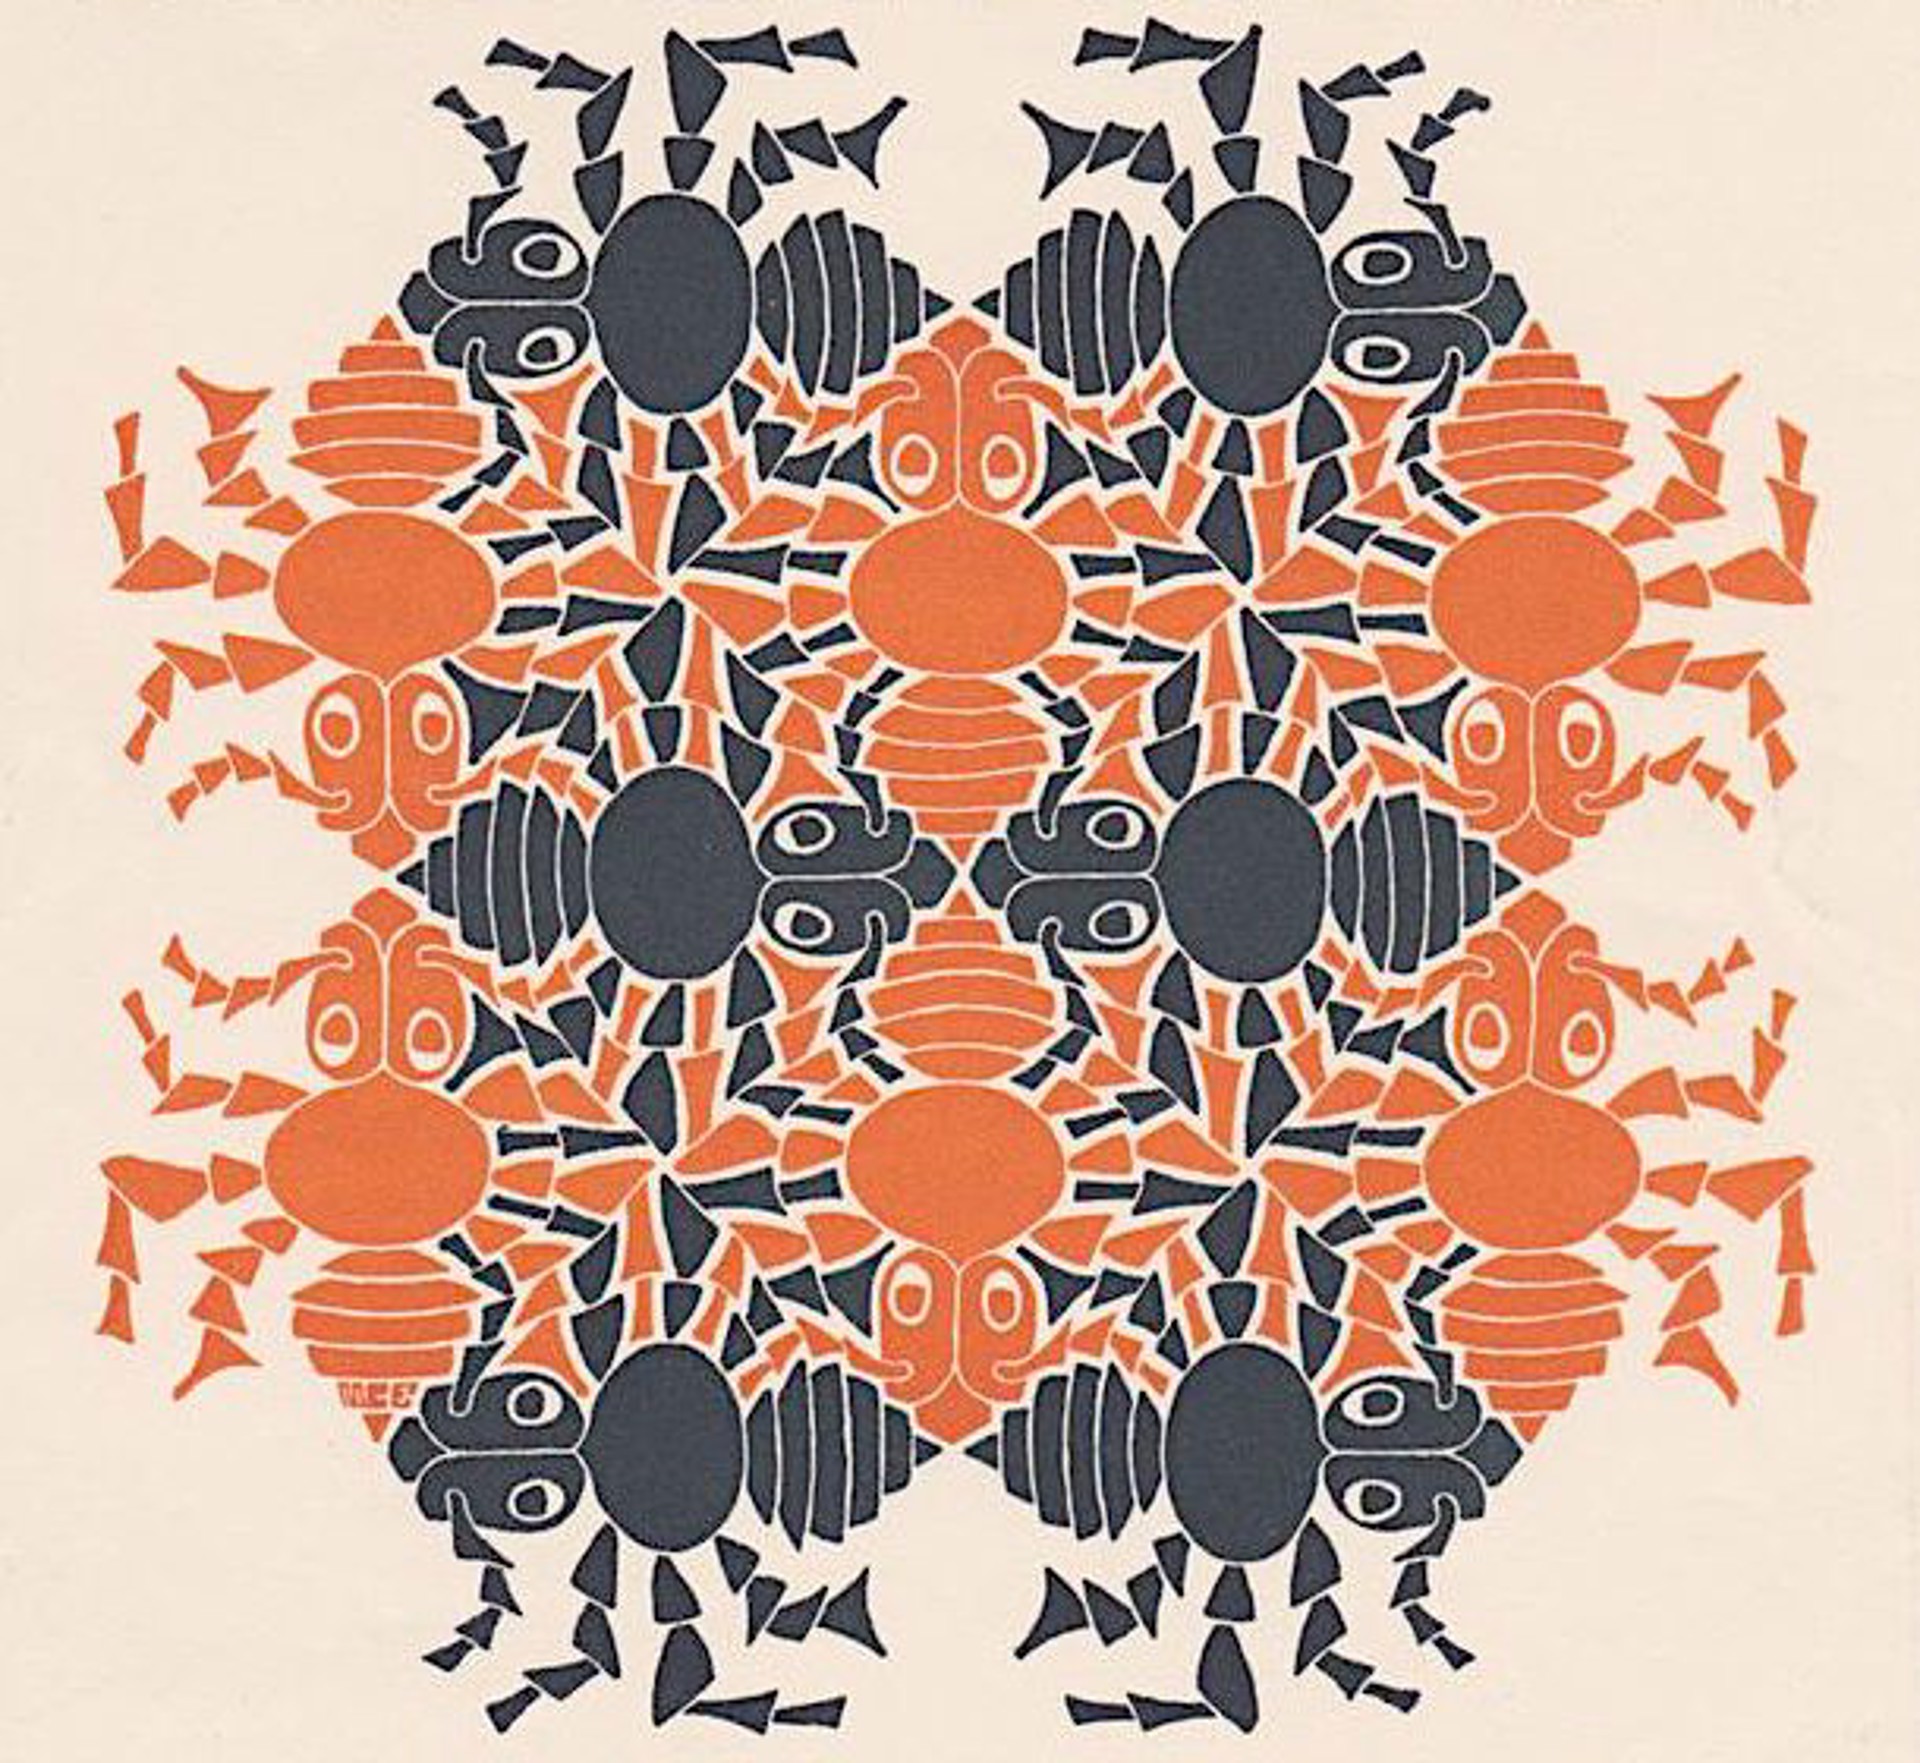 Earth - Strens New Year's Greeting Card (Ants, Variant) by M.C. Escher